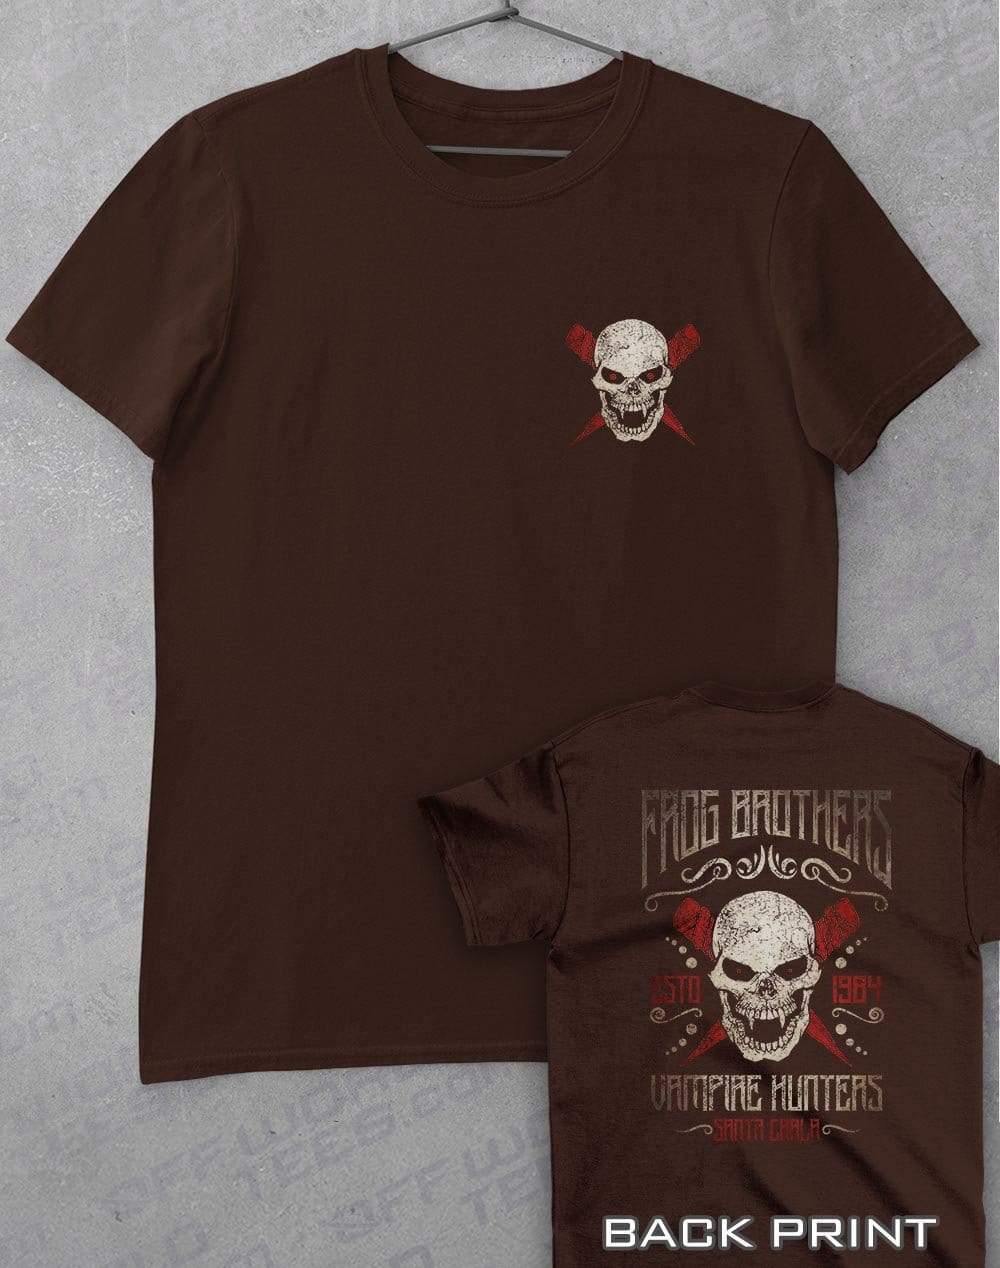 Frog Brothers Vampire Hunters with Back Print T-Shirt S / Dark Chocolate  - Off World Tees